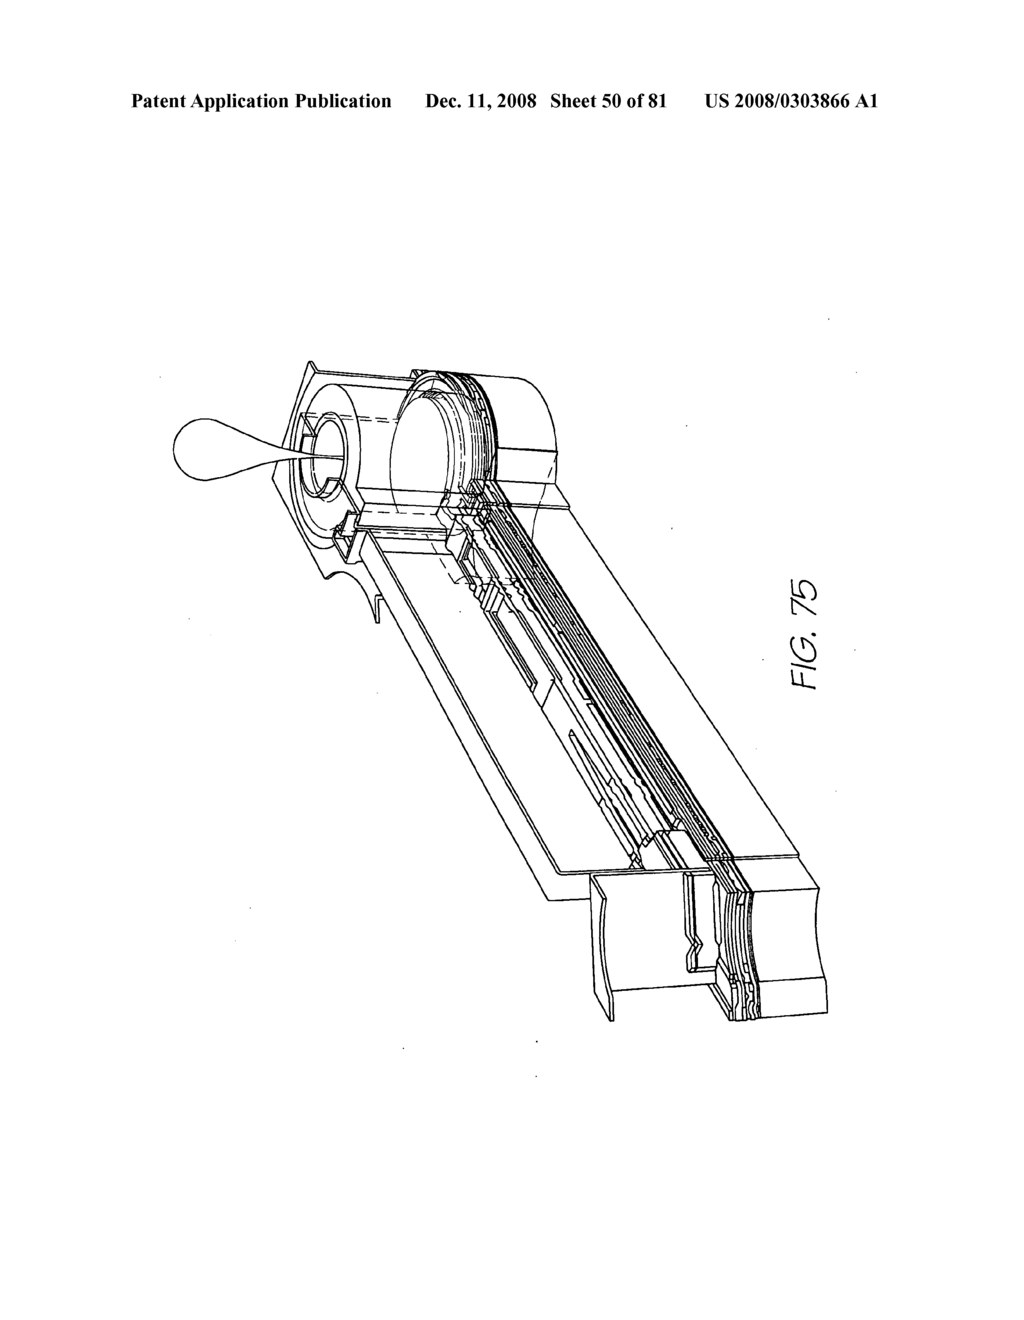 NOZZLE ASSEMBLY FOR AN INKJET PRINTER FOR EJECTING A LOW SPEED DROPLET - diagram, schematic, and image 51